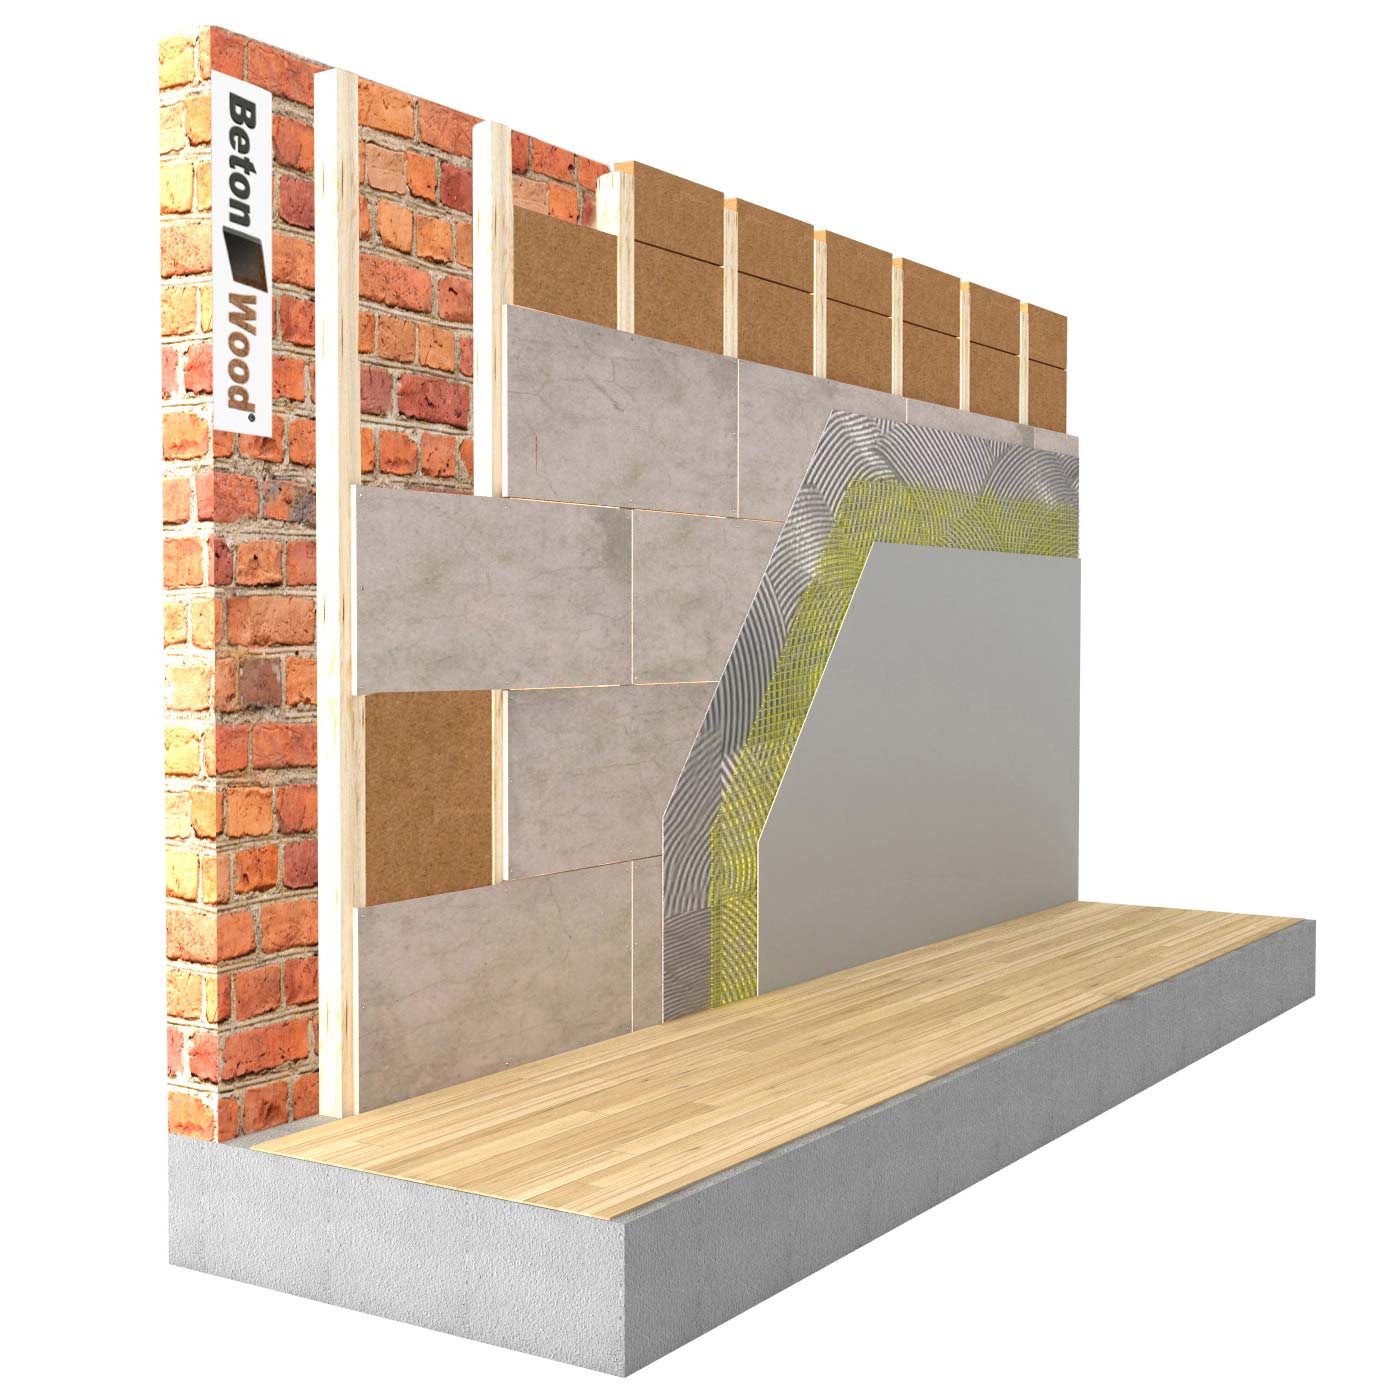 Internal insulation system in Fiber wood and cement bonded particle board